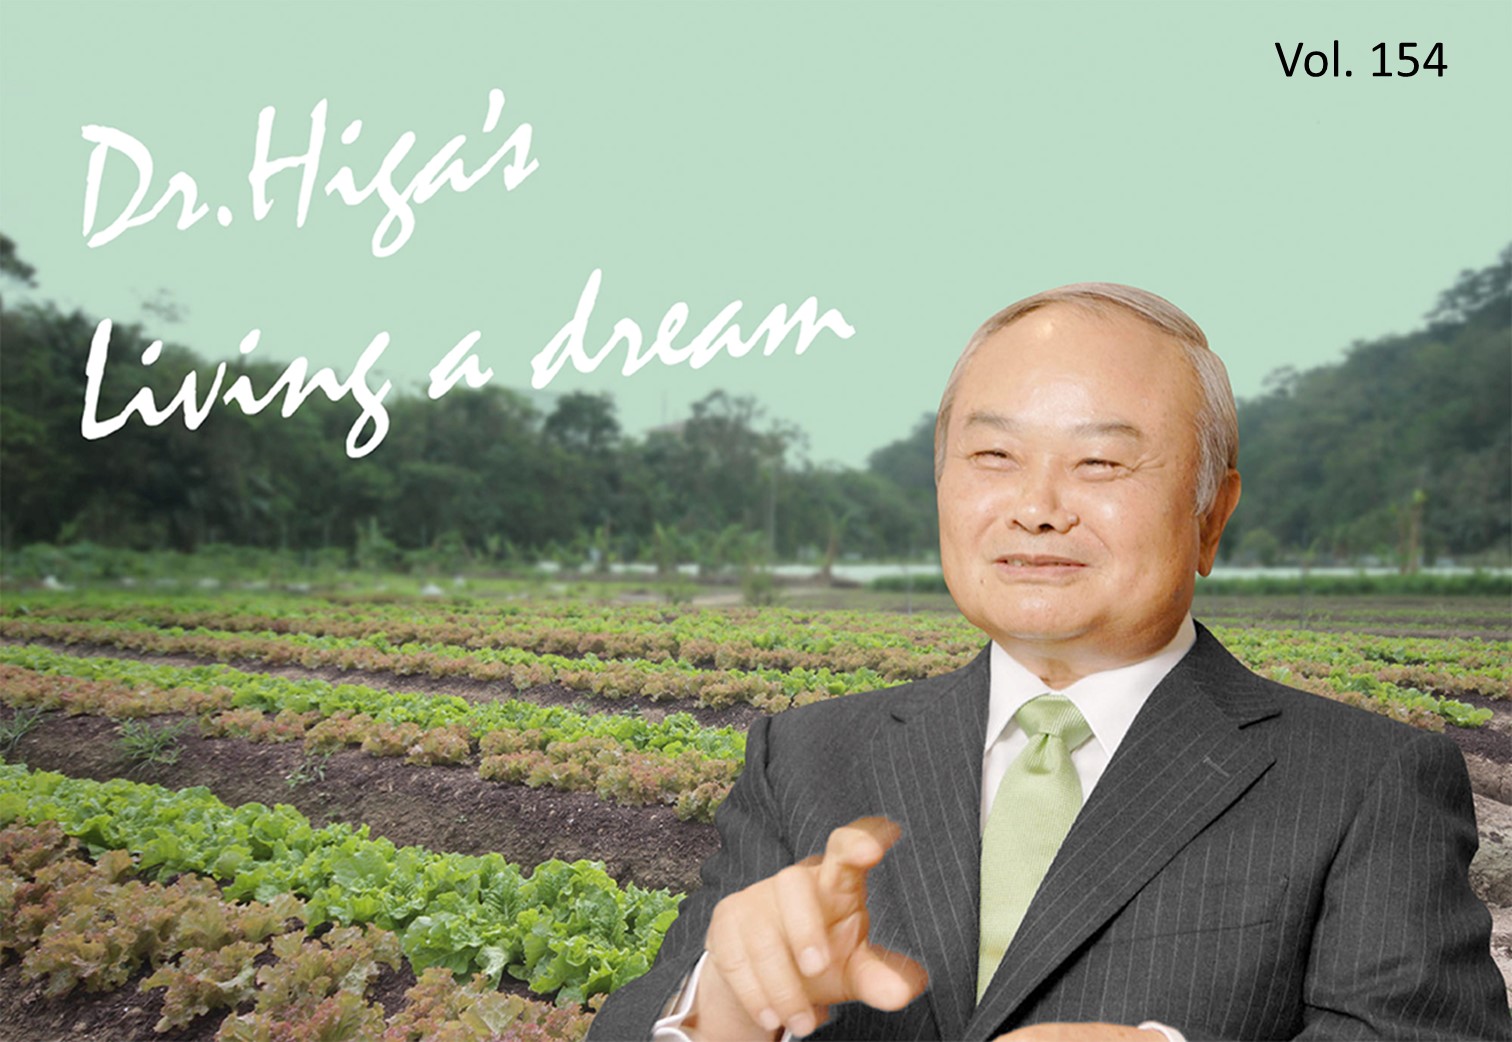 Dr. Higa's "Living a Dream": The latest article #154 is up!